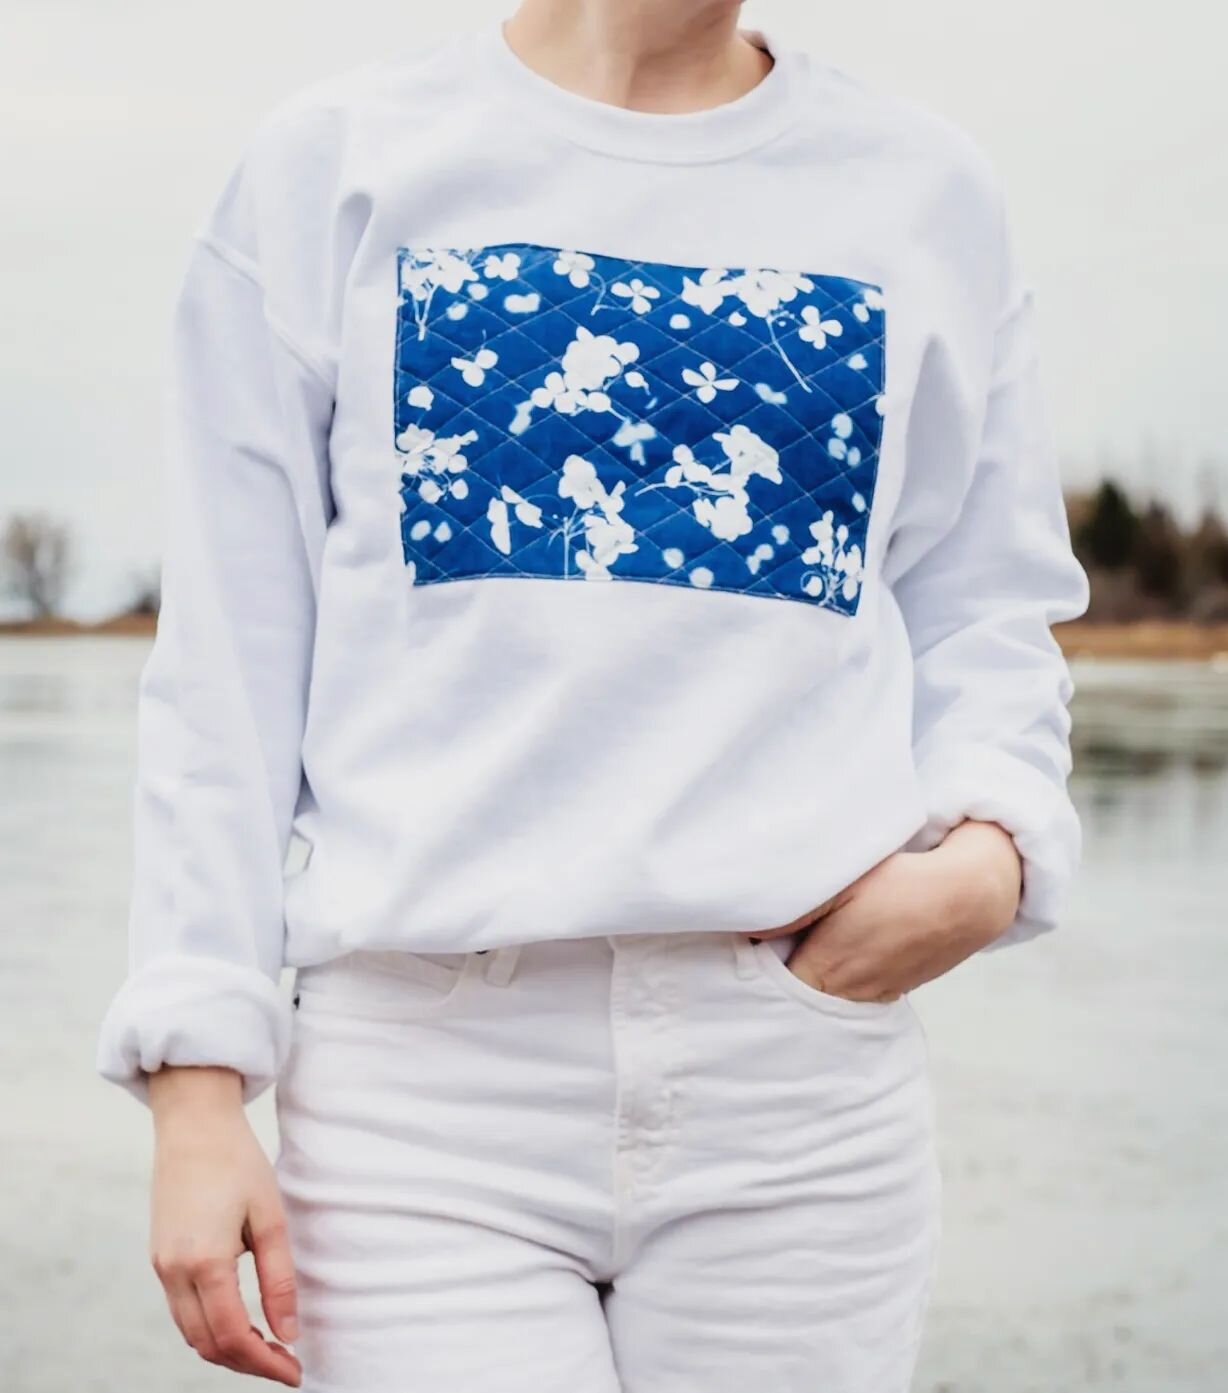 New crewnecks are now available! Each one features a unique print created with a little bit of sunshine and a lot of love. You can find them all at @marketsontario and @thecollectivemarketoshawa 🤍💙

Featured: White Heavy Blend Crewneck with Hydrang